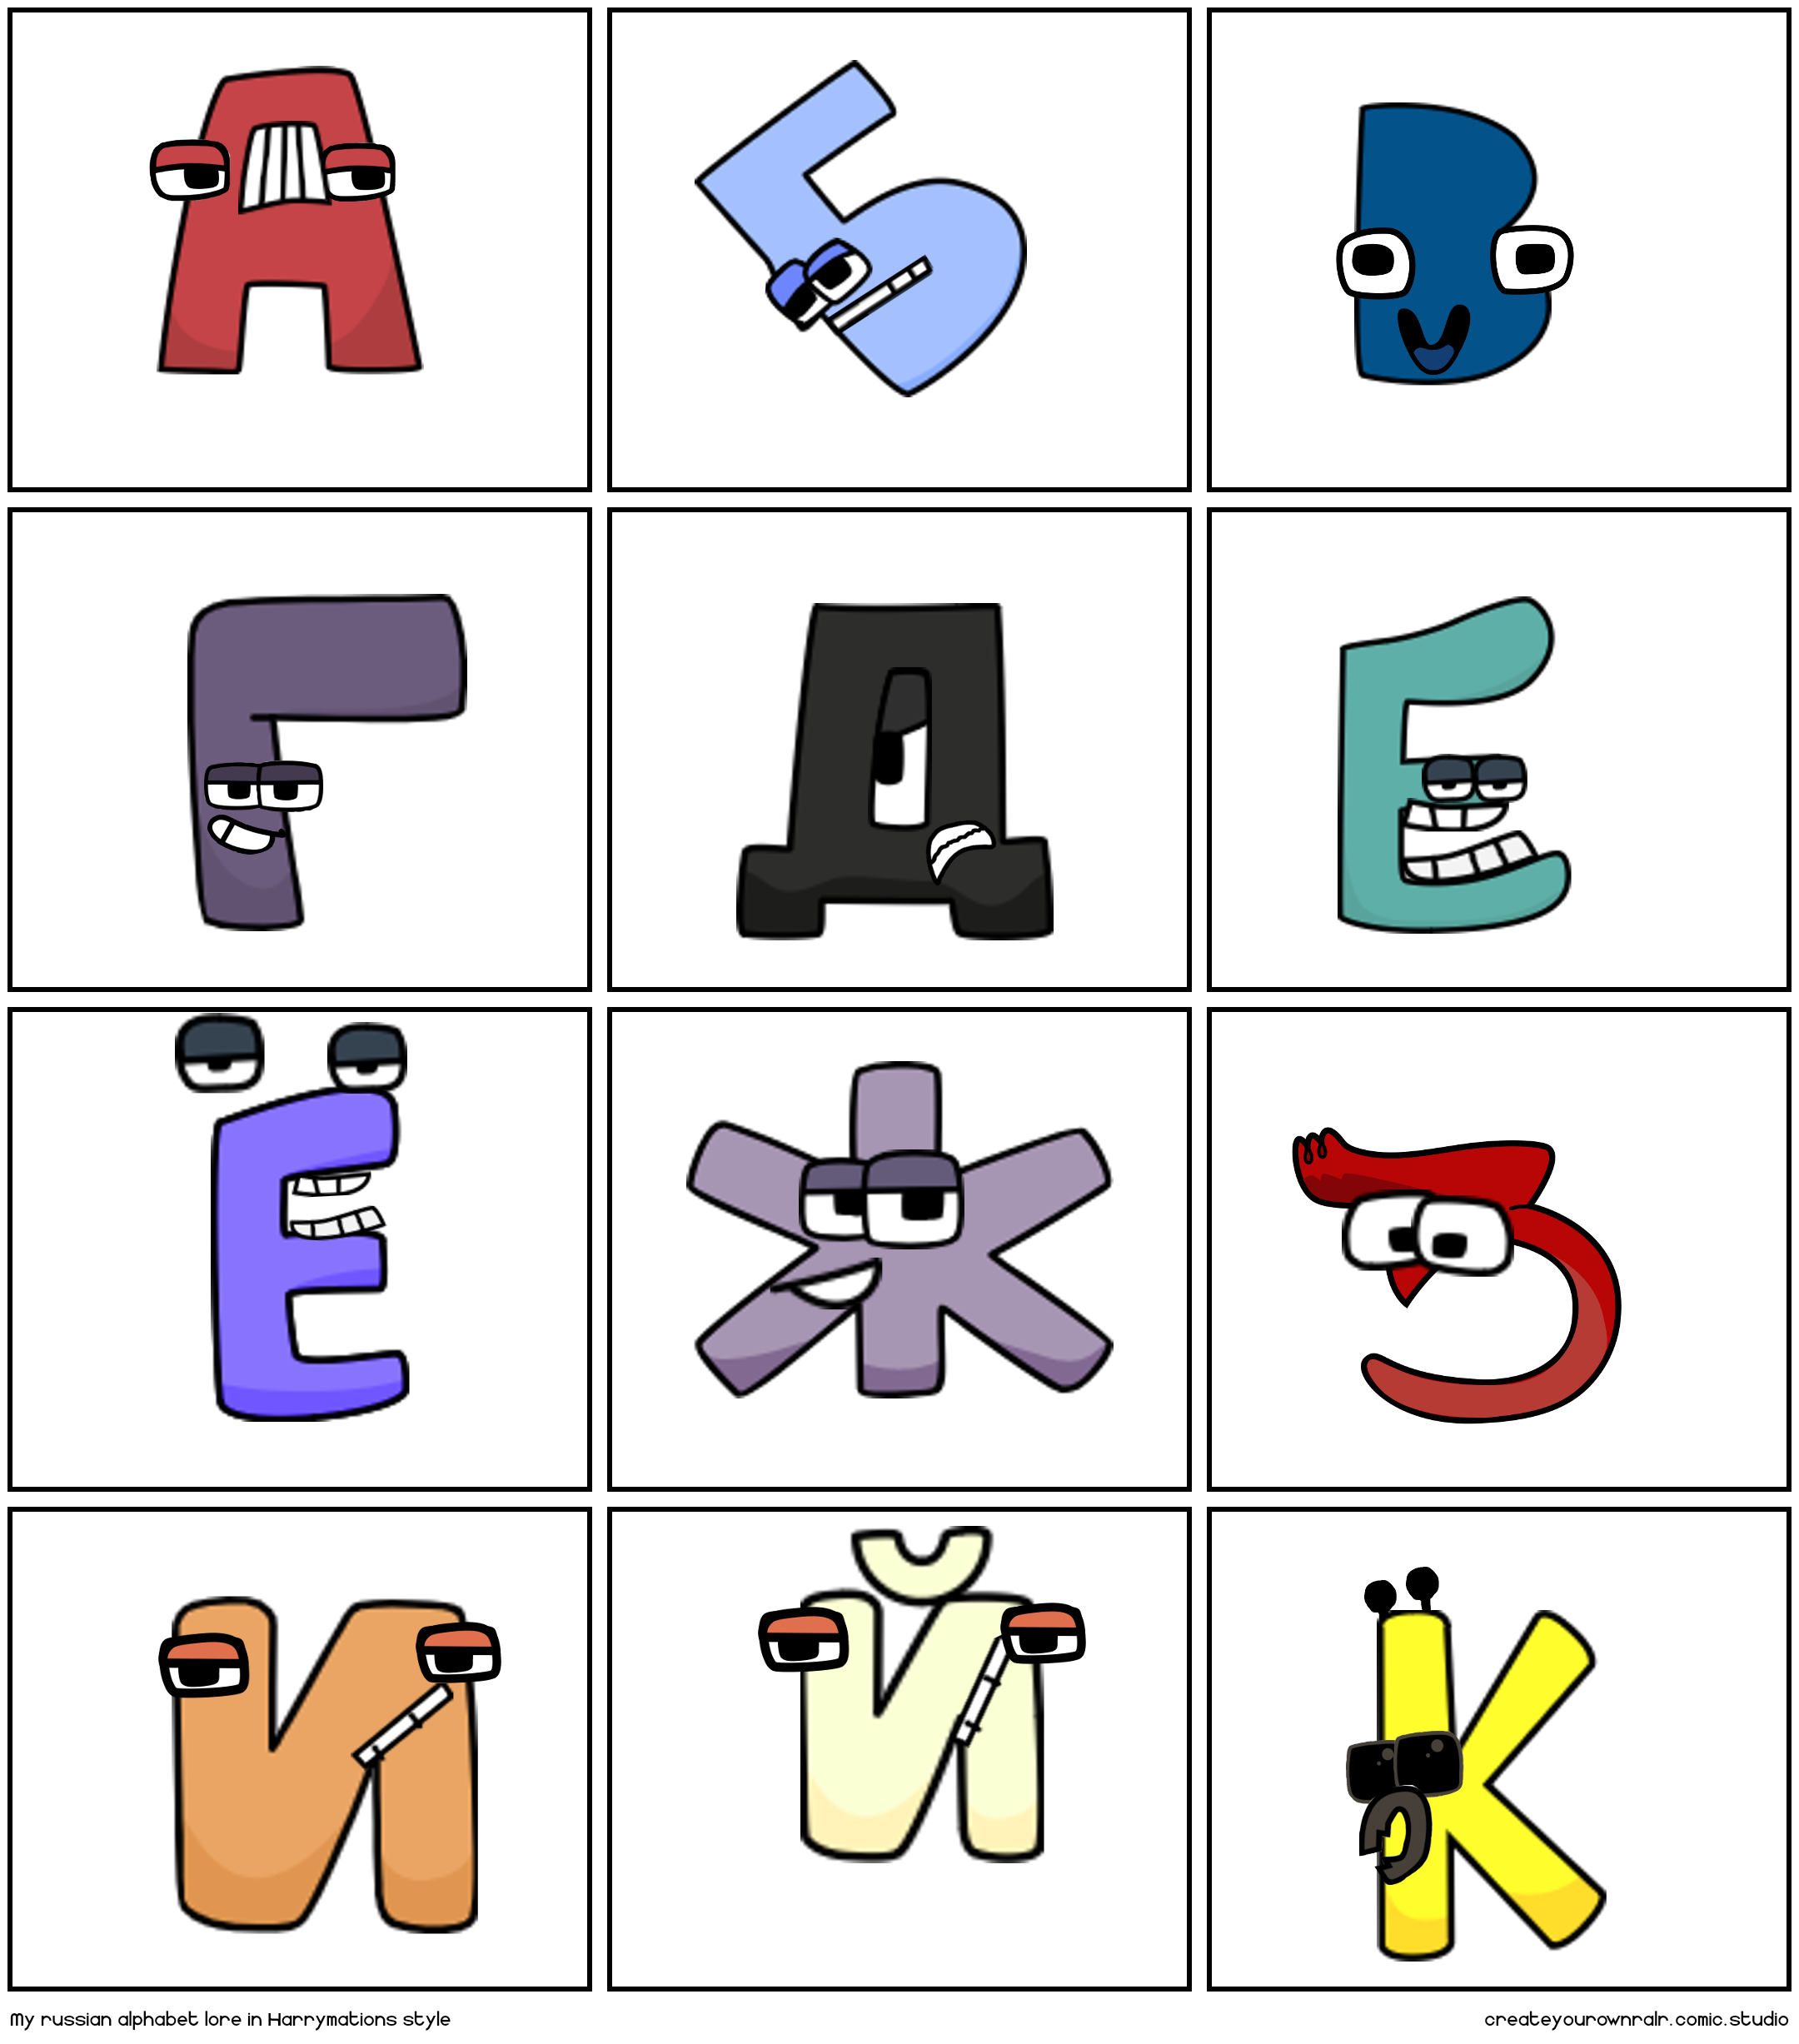 My russian alphabet lore in Harrymations style